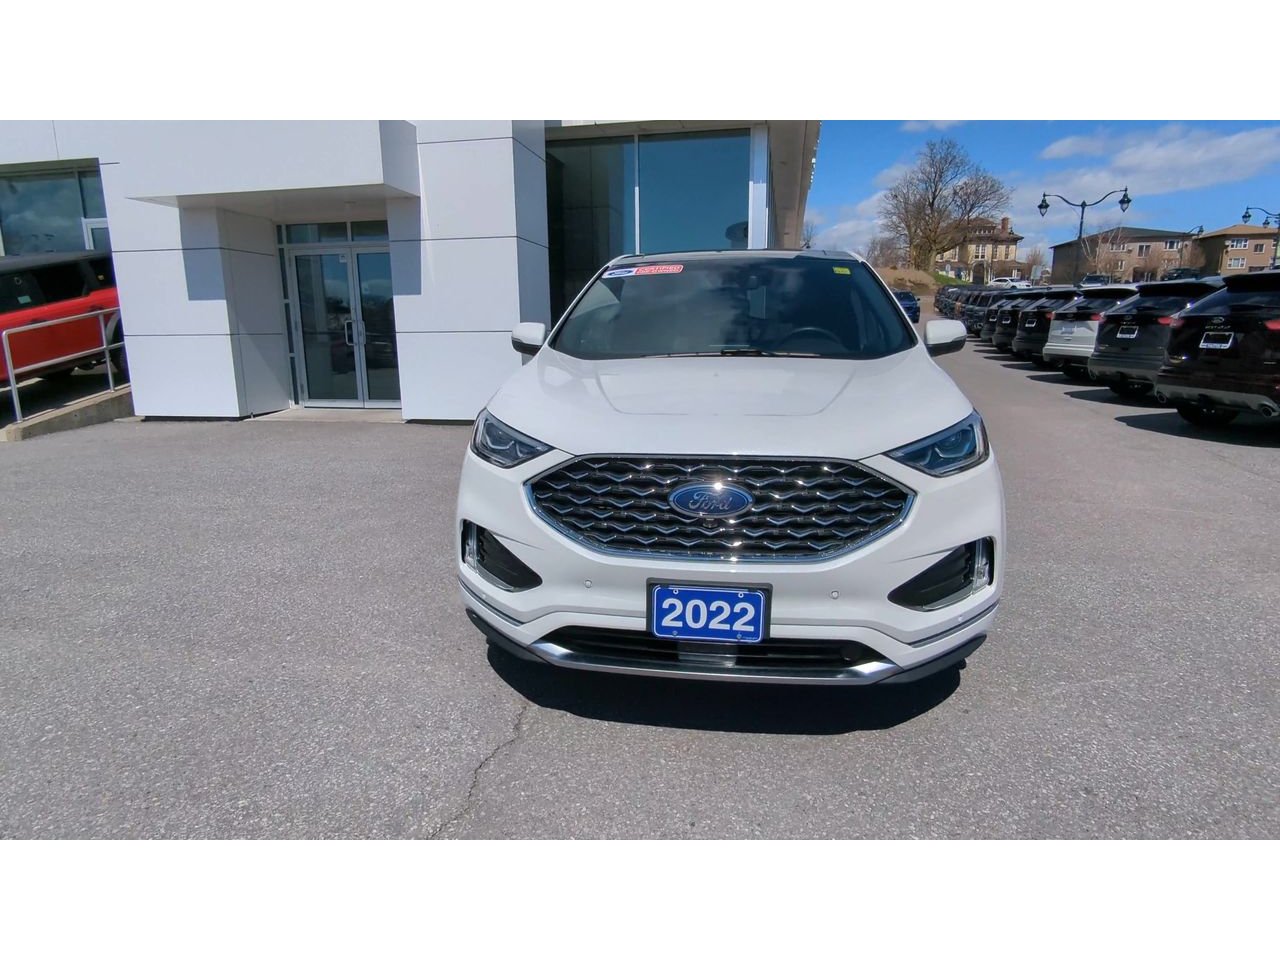 2022 Ford Edge - 21598A Full Image 3